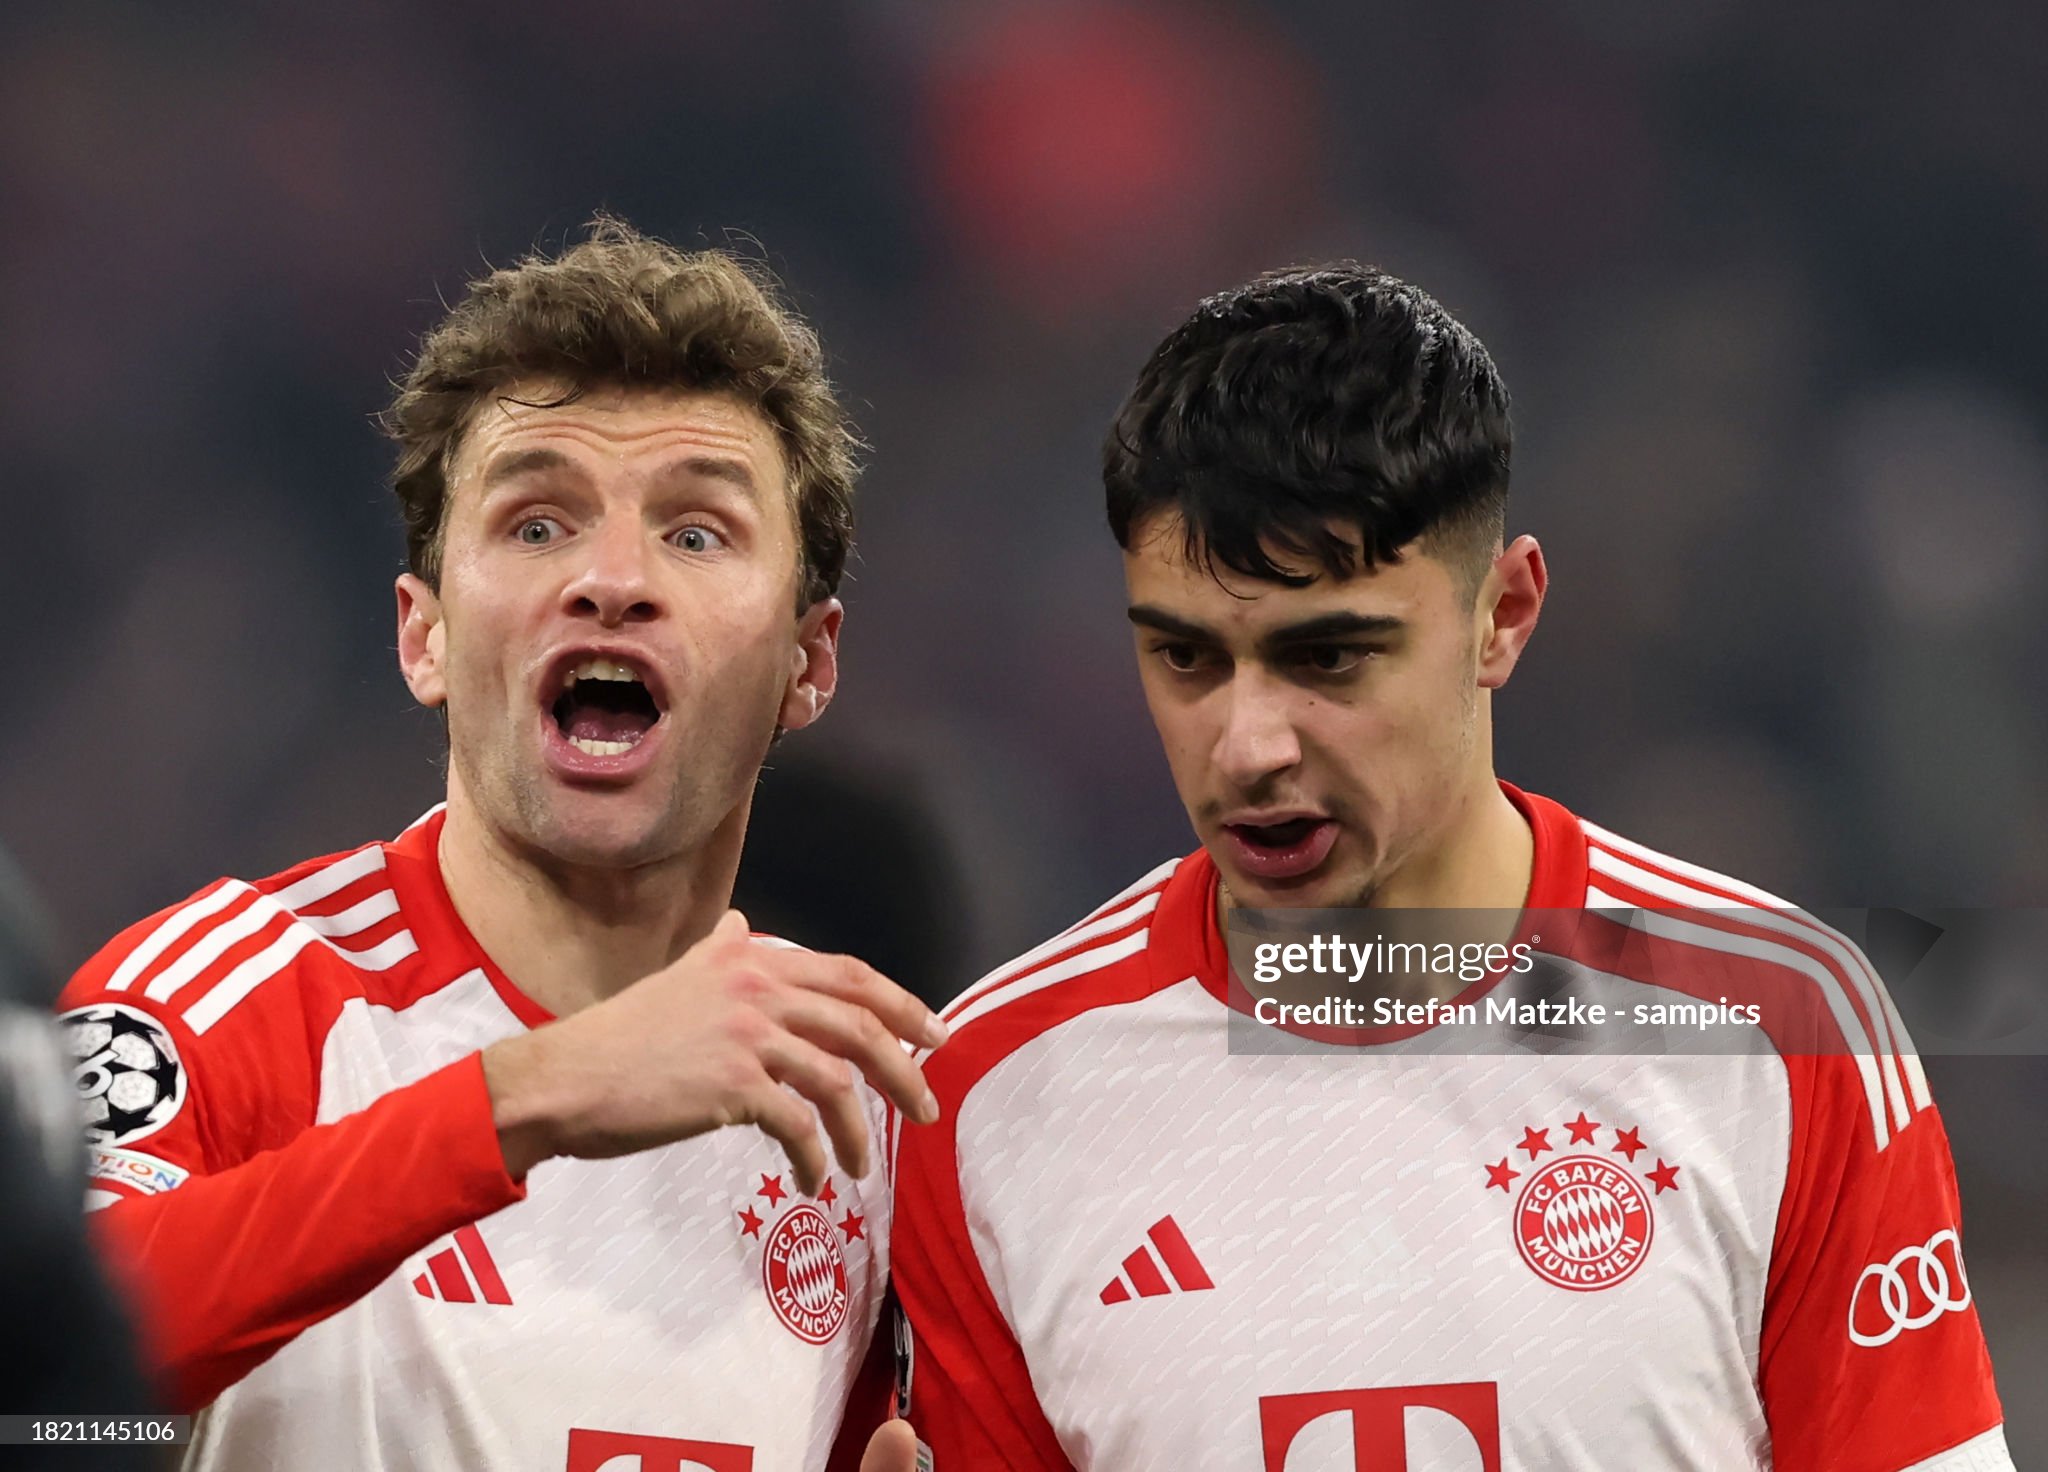 Müller complains about penalty inconsistency: why PSG and not Bayern?